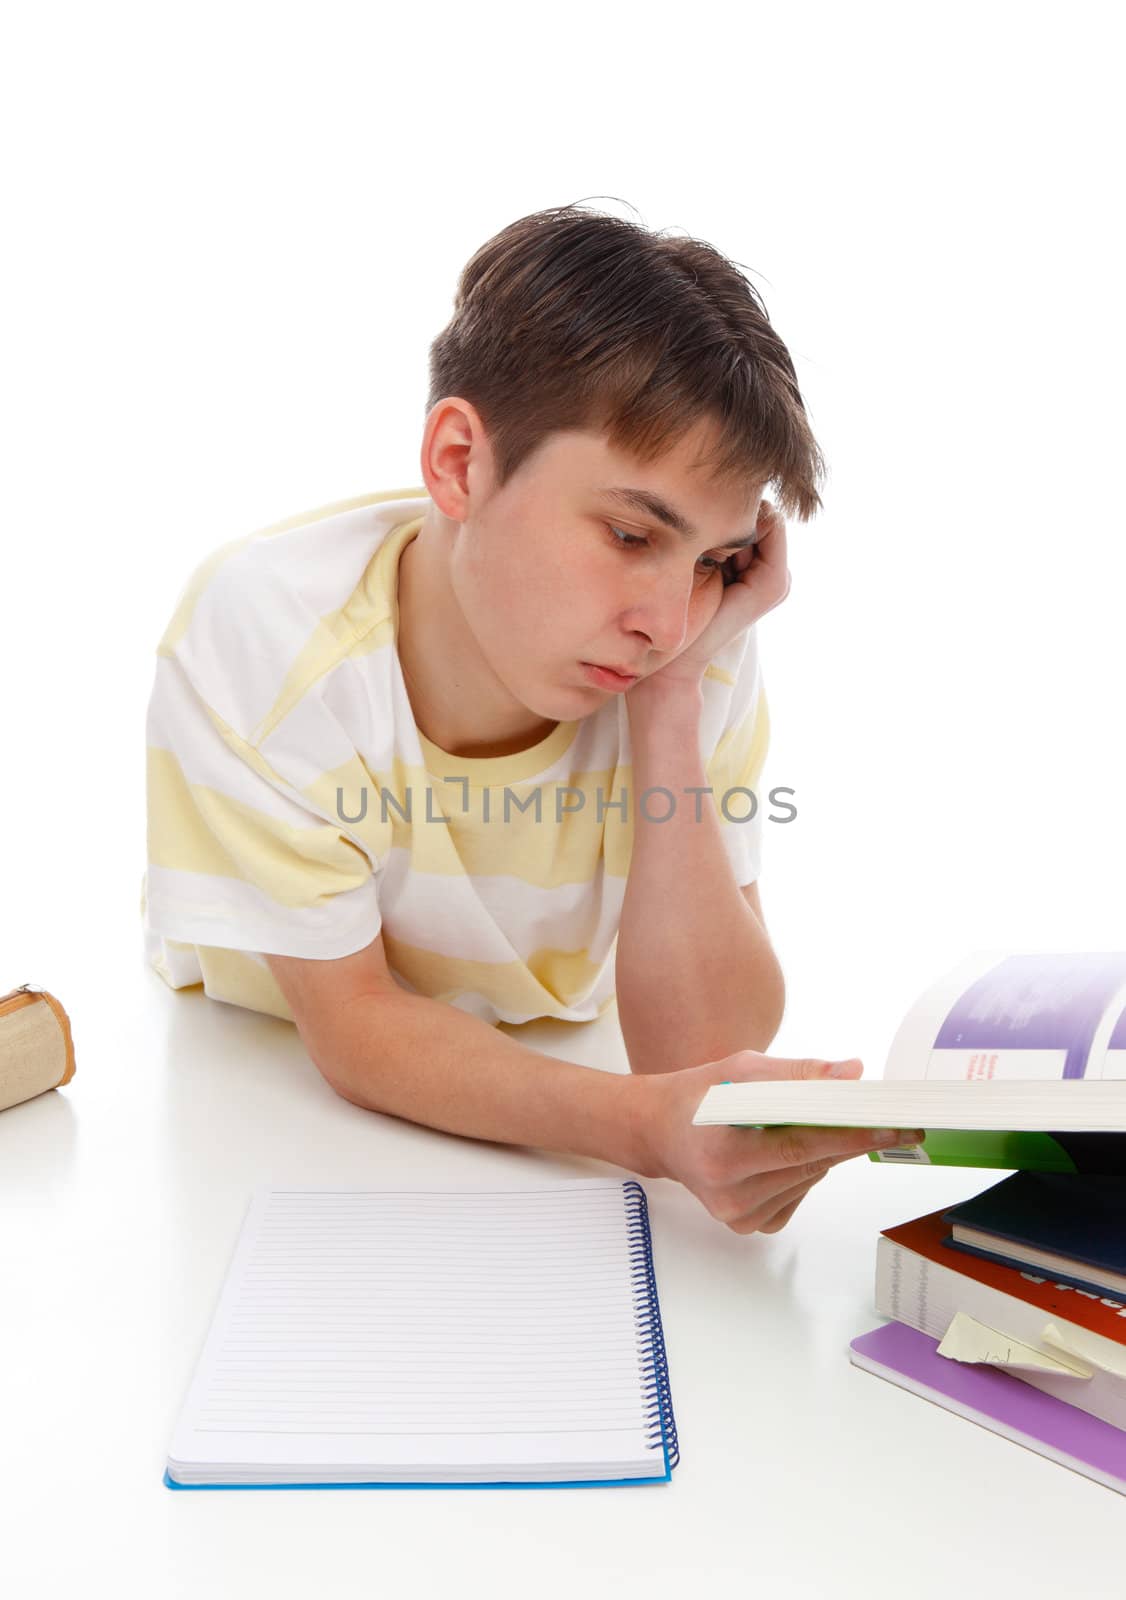 A boy reading or studying textbooks.